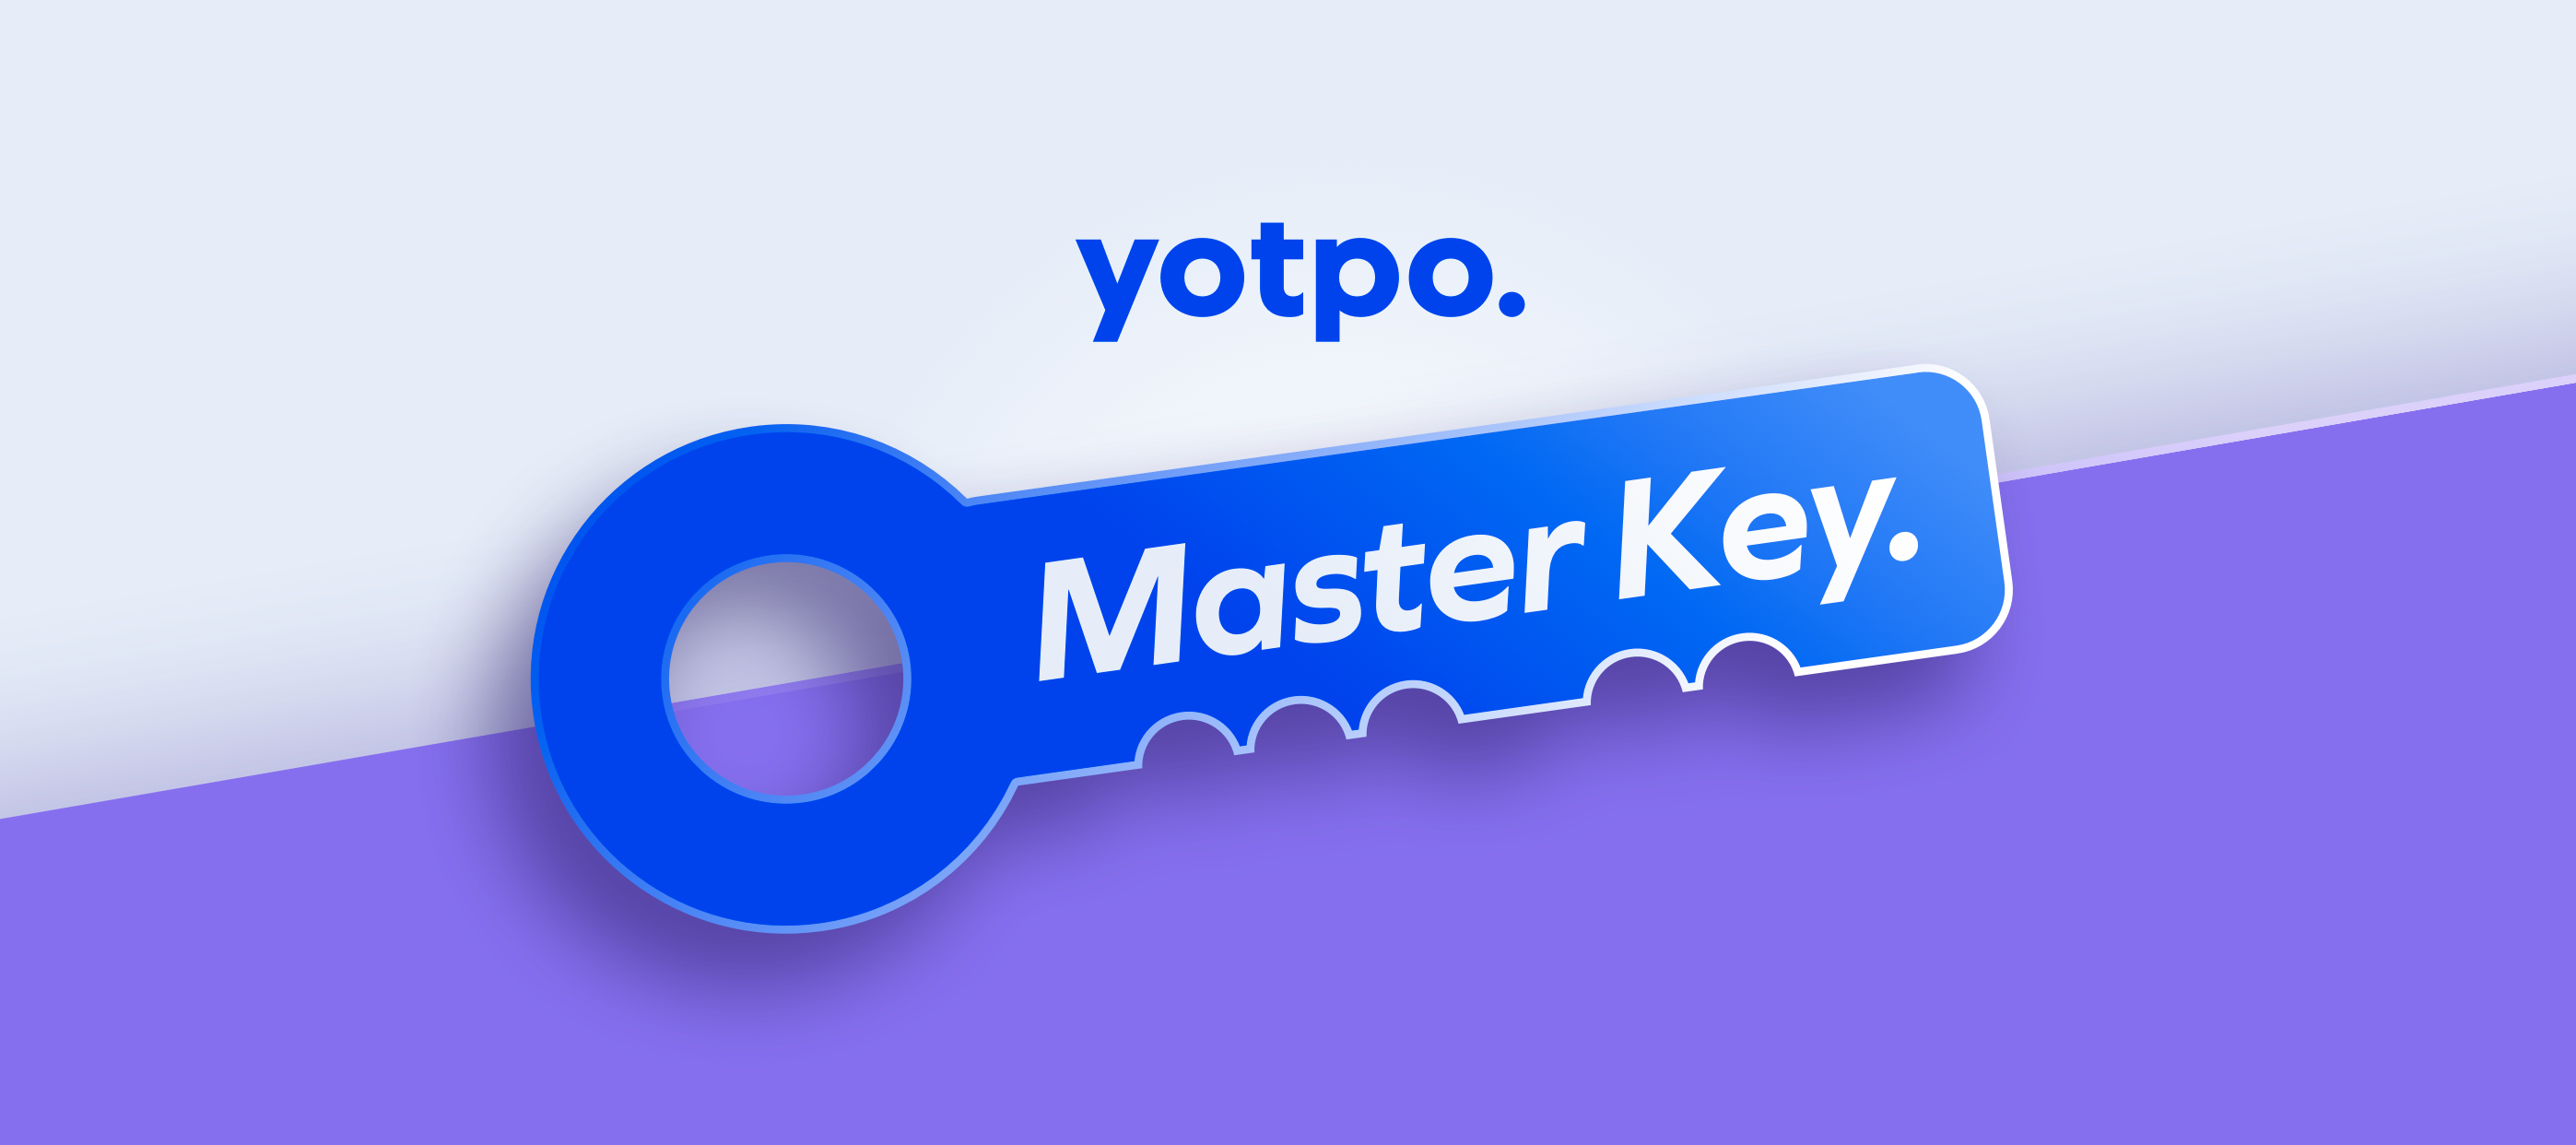 Yotpo Master Key: A New Perk for Our Customers